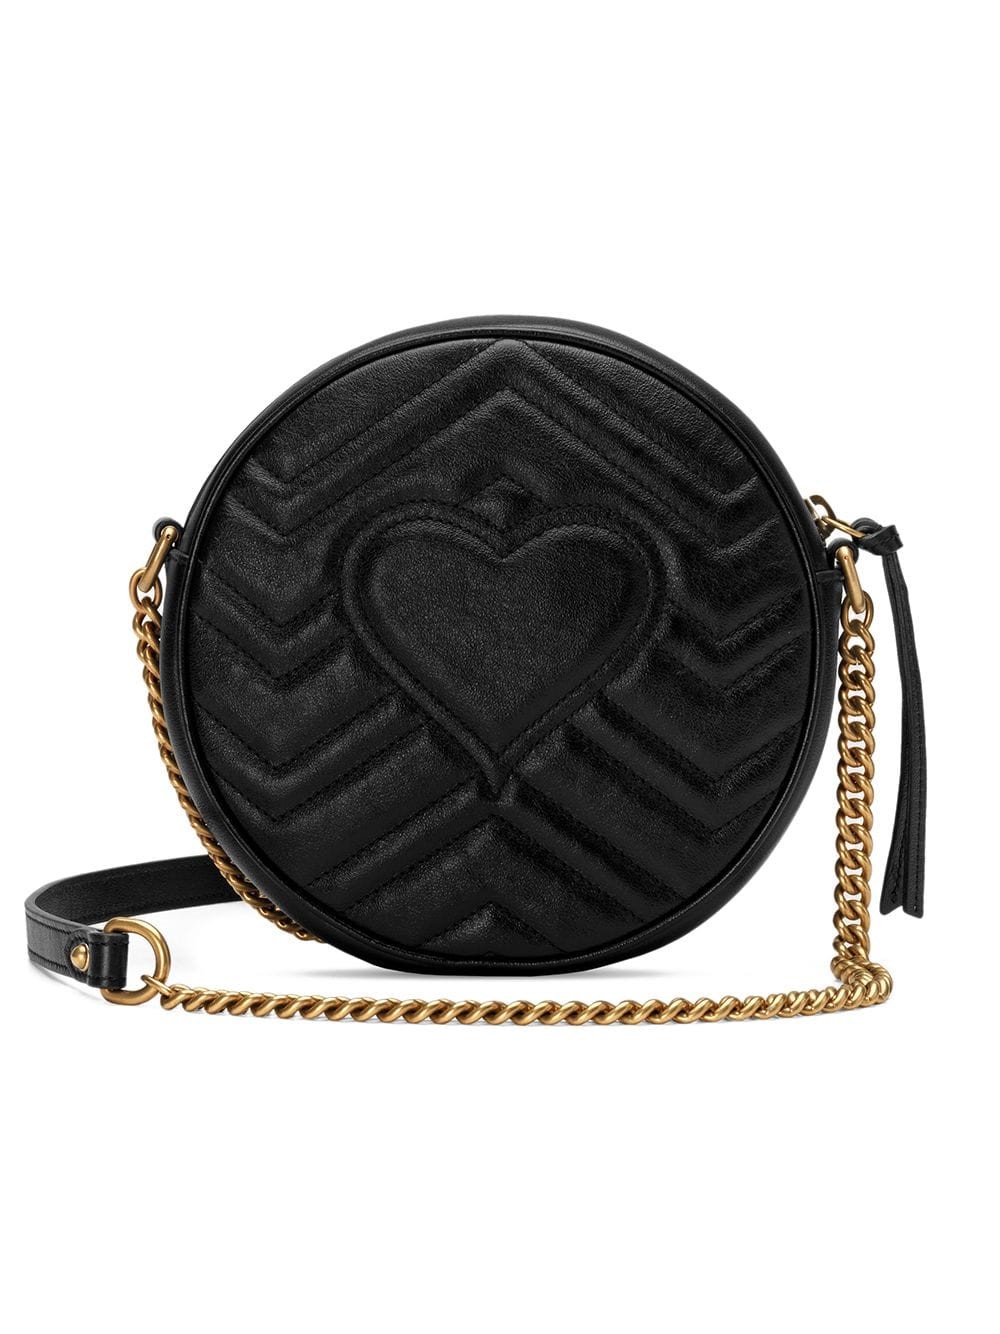 gucci GG MARMONT ROUND BAG available on mediakits.theygsgroup.com - 27417